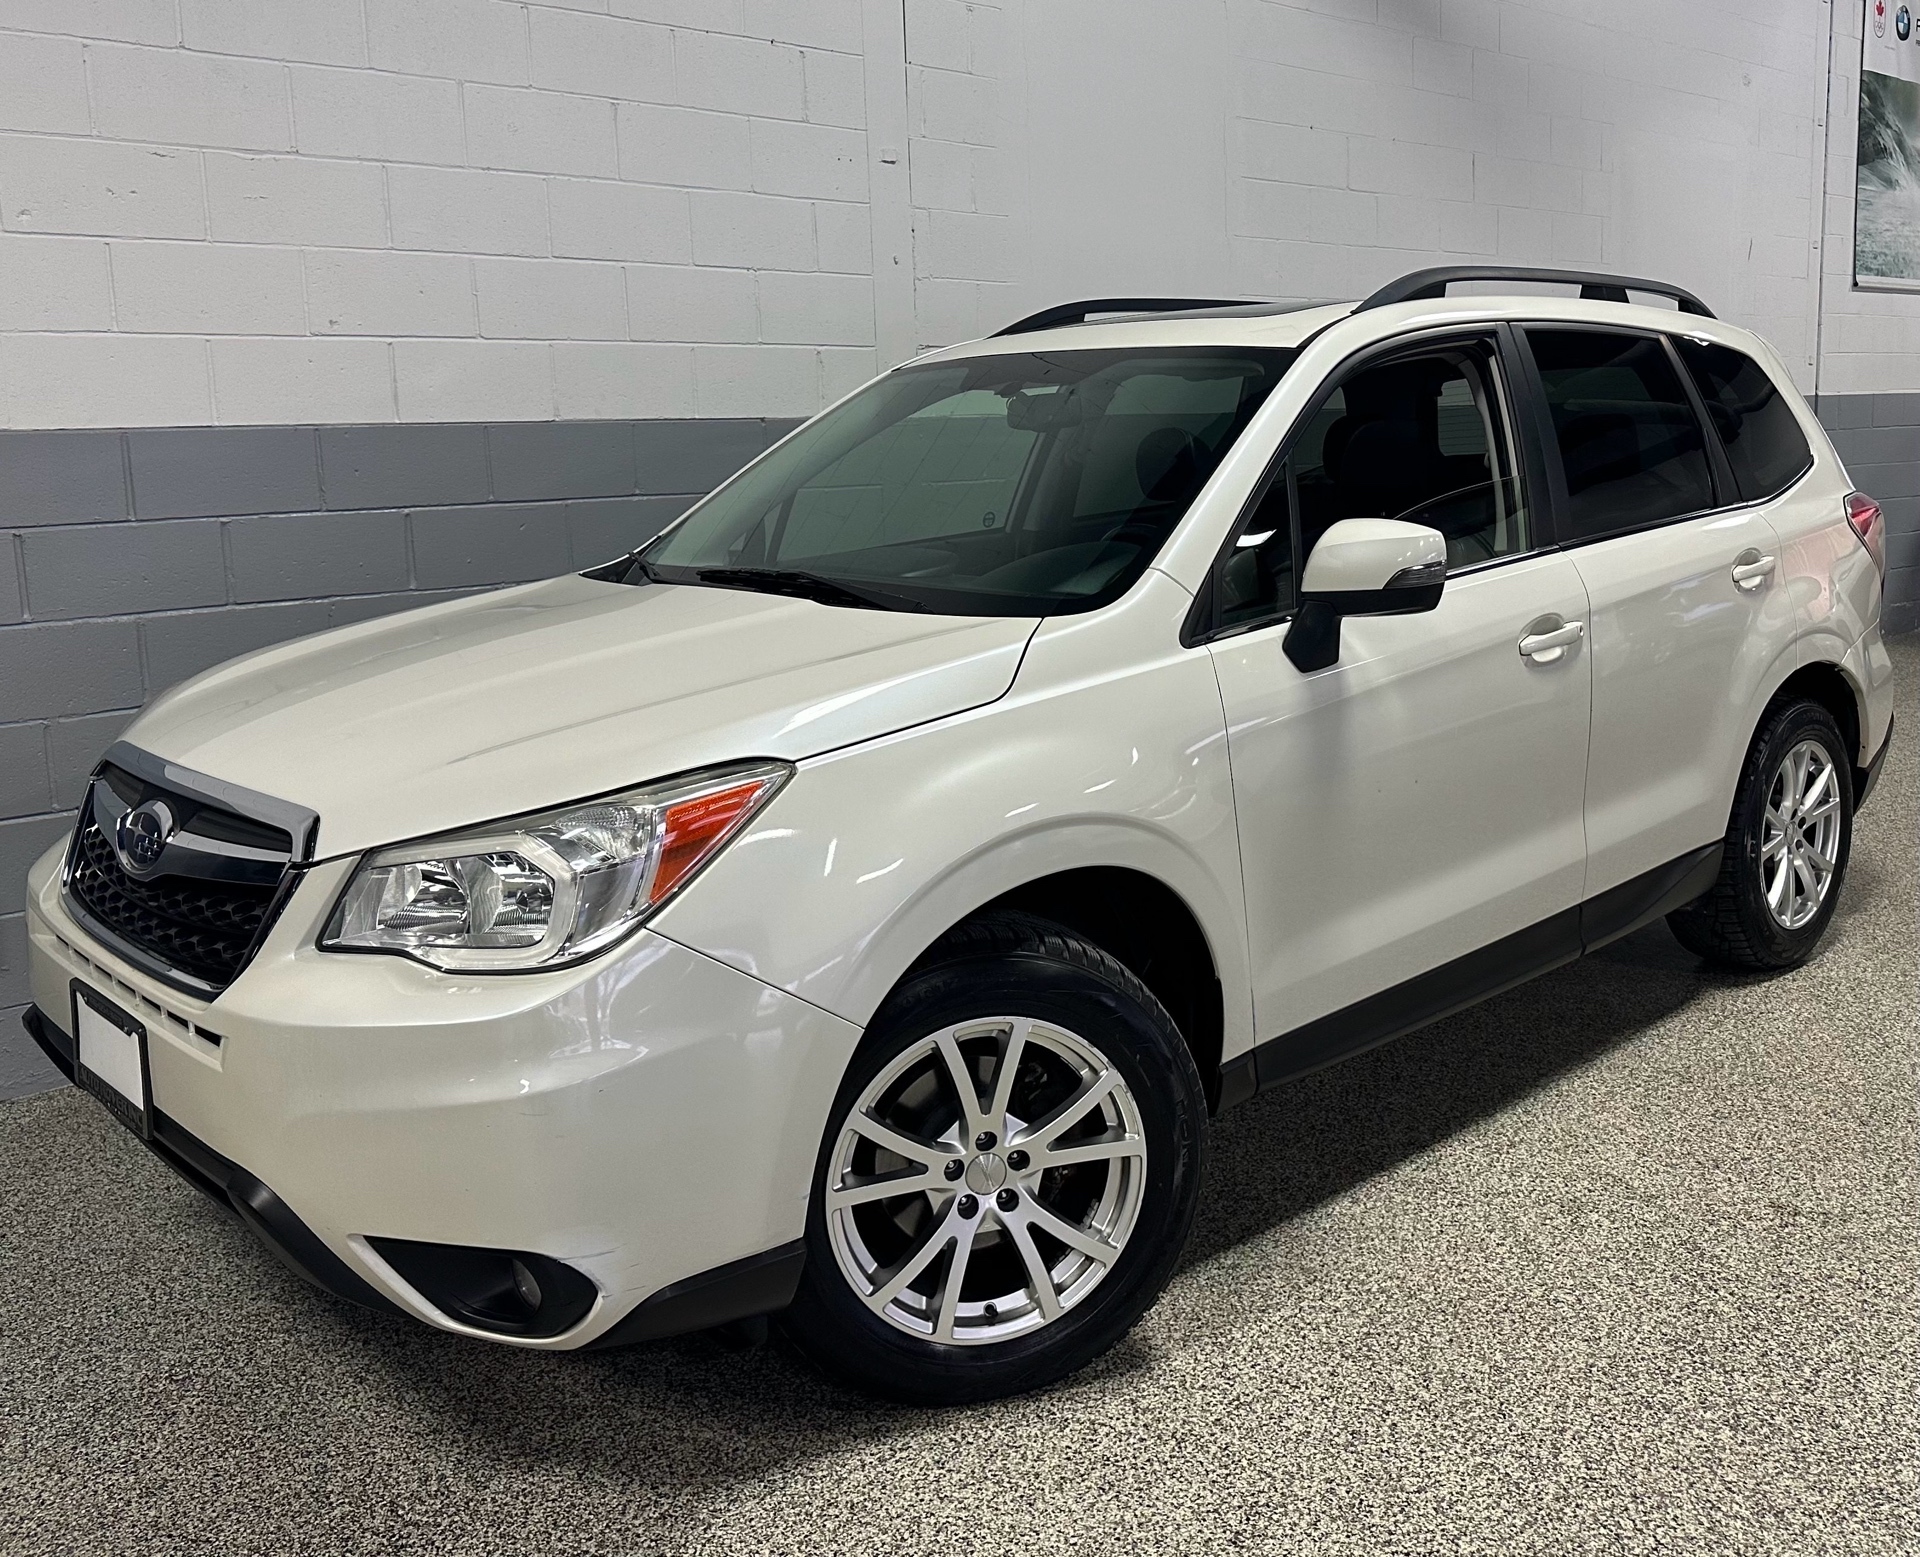 2015 Subaru FORESTER TOURING AWD LIMITED /NO ACCIDENTS/NAVIGATION/REARVIEW CAMERA/PANORAMIC